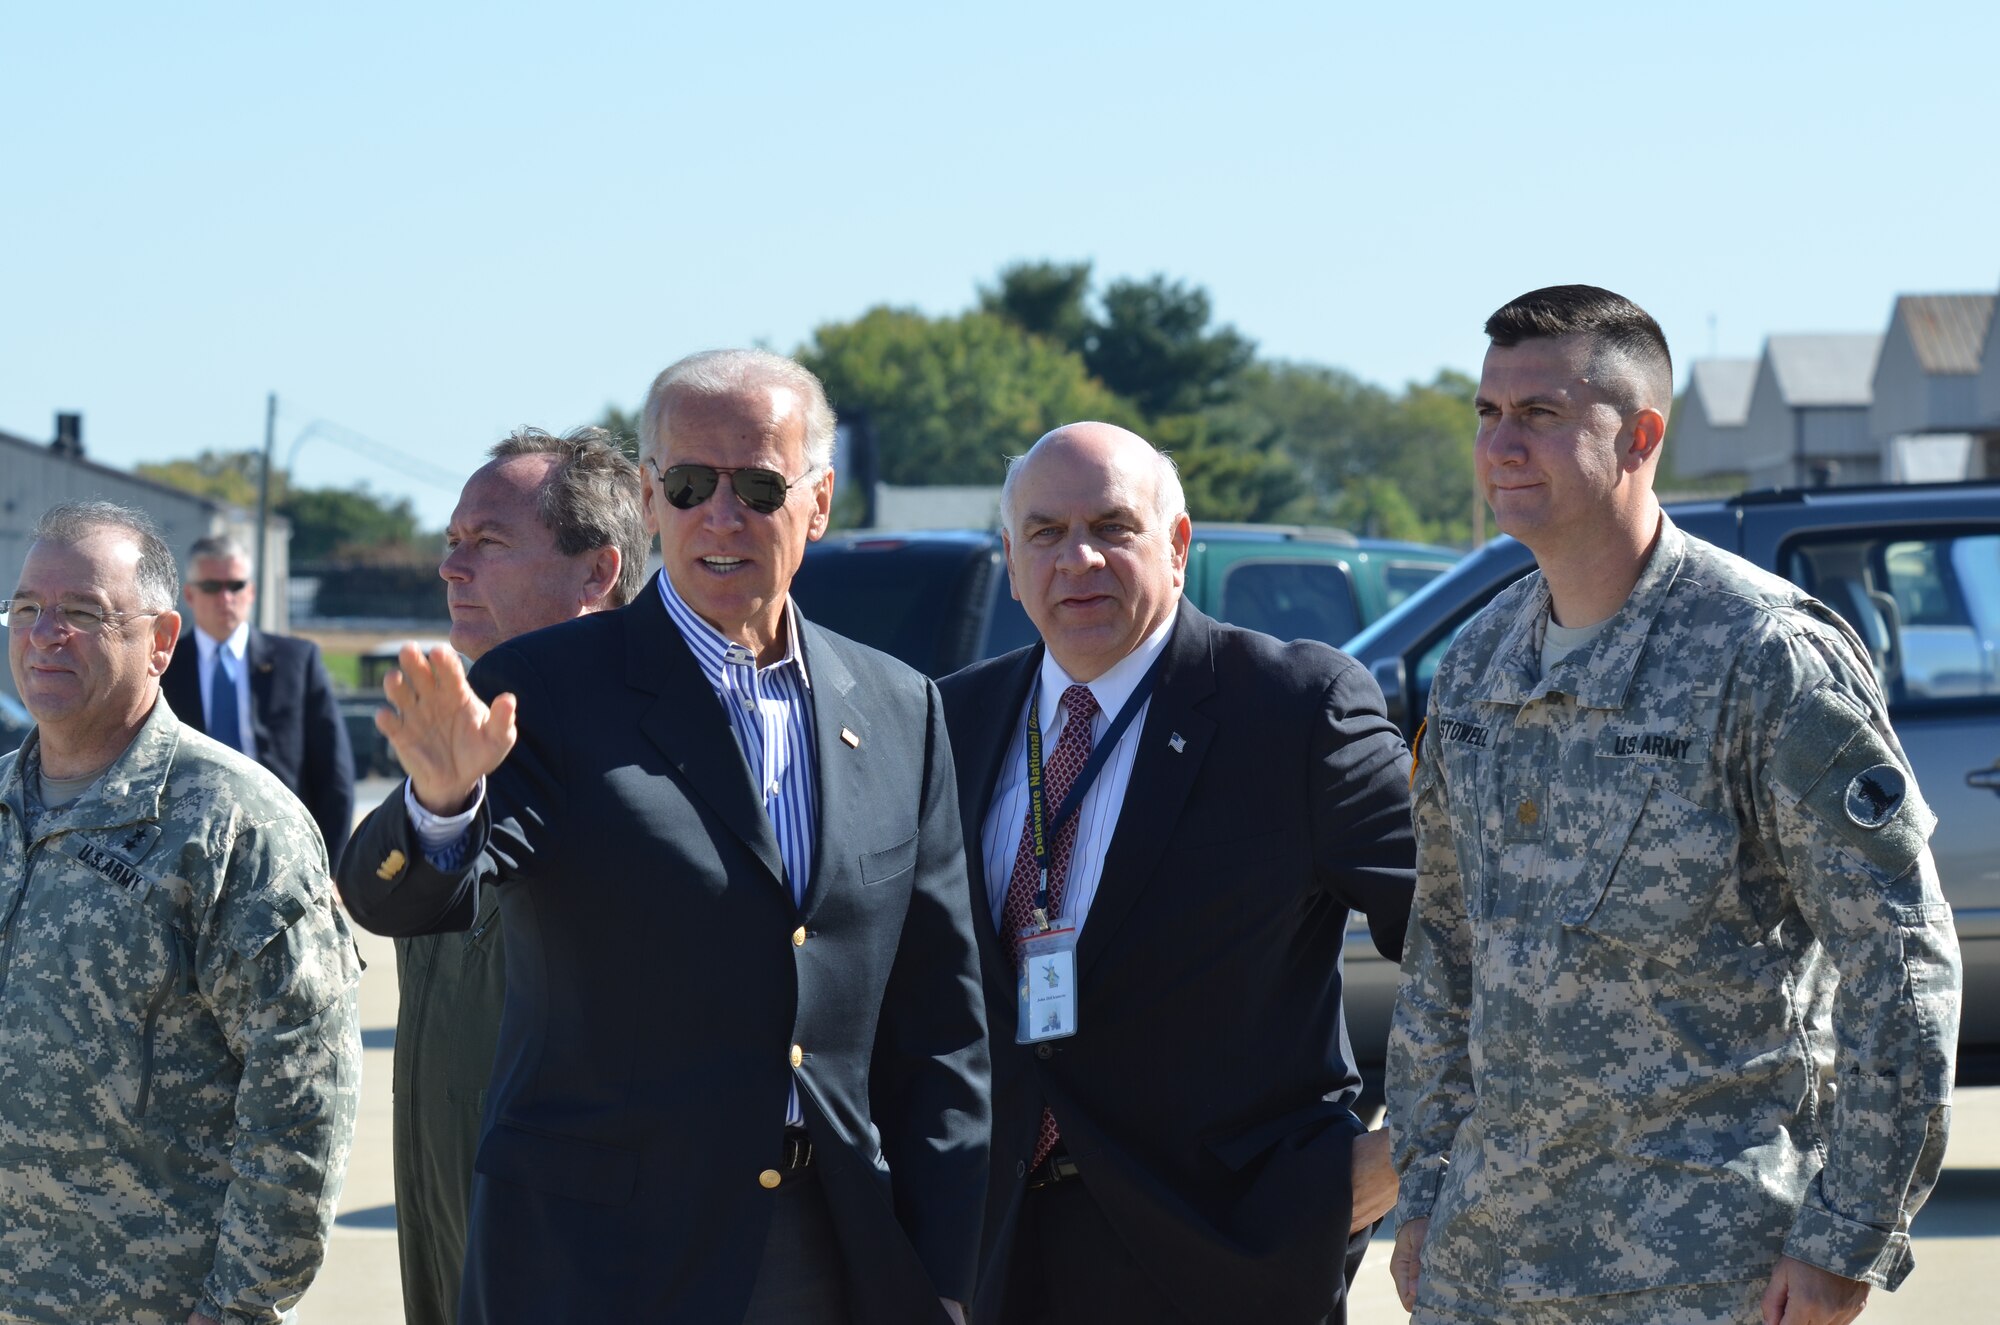 Vice President Joe Biden waves to members of the press after he is greeted by Maj. Gen. Frank D. Vavala, The Adjutant General, Delaware National Guard, Col. Mike Feeley, commander, 166th Airlift Wing, Delaware Air National Guard, Mr. John DiEleuterio, Director of Inter-Governmental Relations, Delaware National Guard, and Maj. Jeff Stowell, executive officer to the Adjutant General, Delaware National Guard, as he arrives at the New Castle Air National Guard Base, Delaware on October 11, 2012 to board Air Force Two for a flight to Lexington Blue Grass Airport, in Lexington, Ky., for tonight’s vice presidential debate in nearby Danville, Ky. (U.S. Air Force photo/Staff Sgt. Nathan Bright)